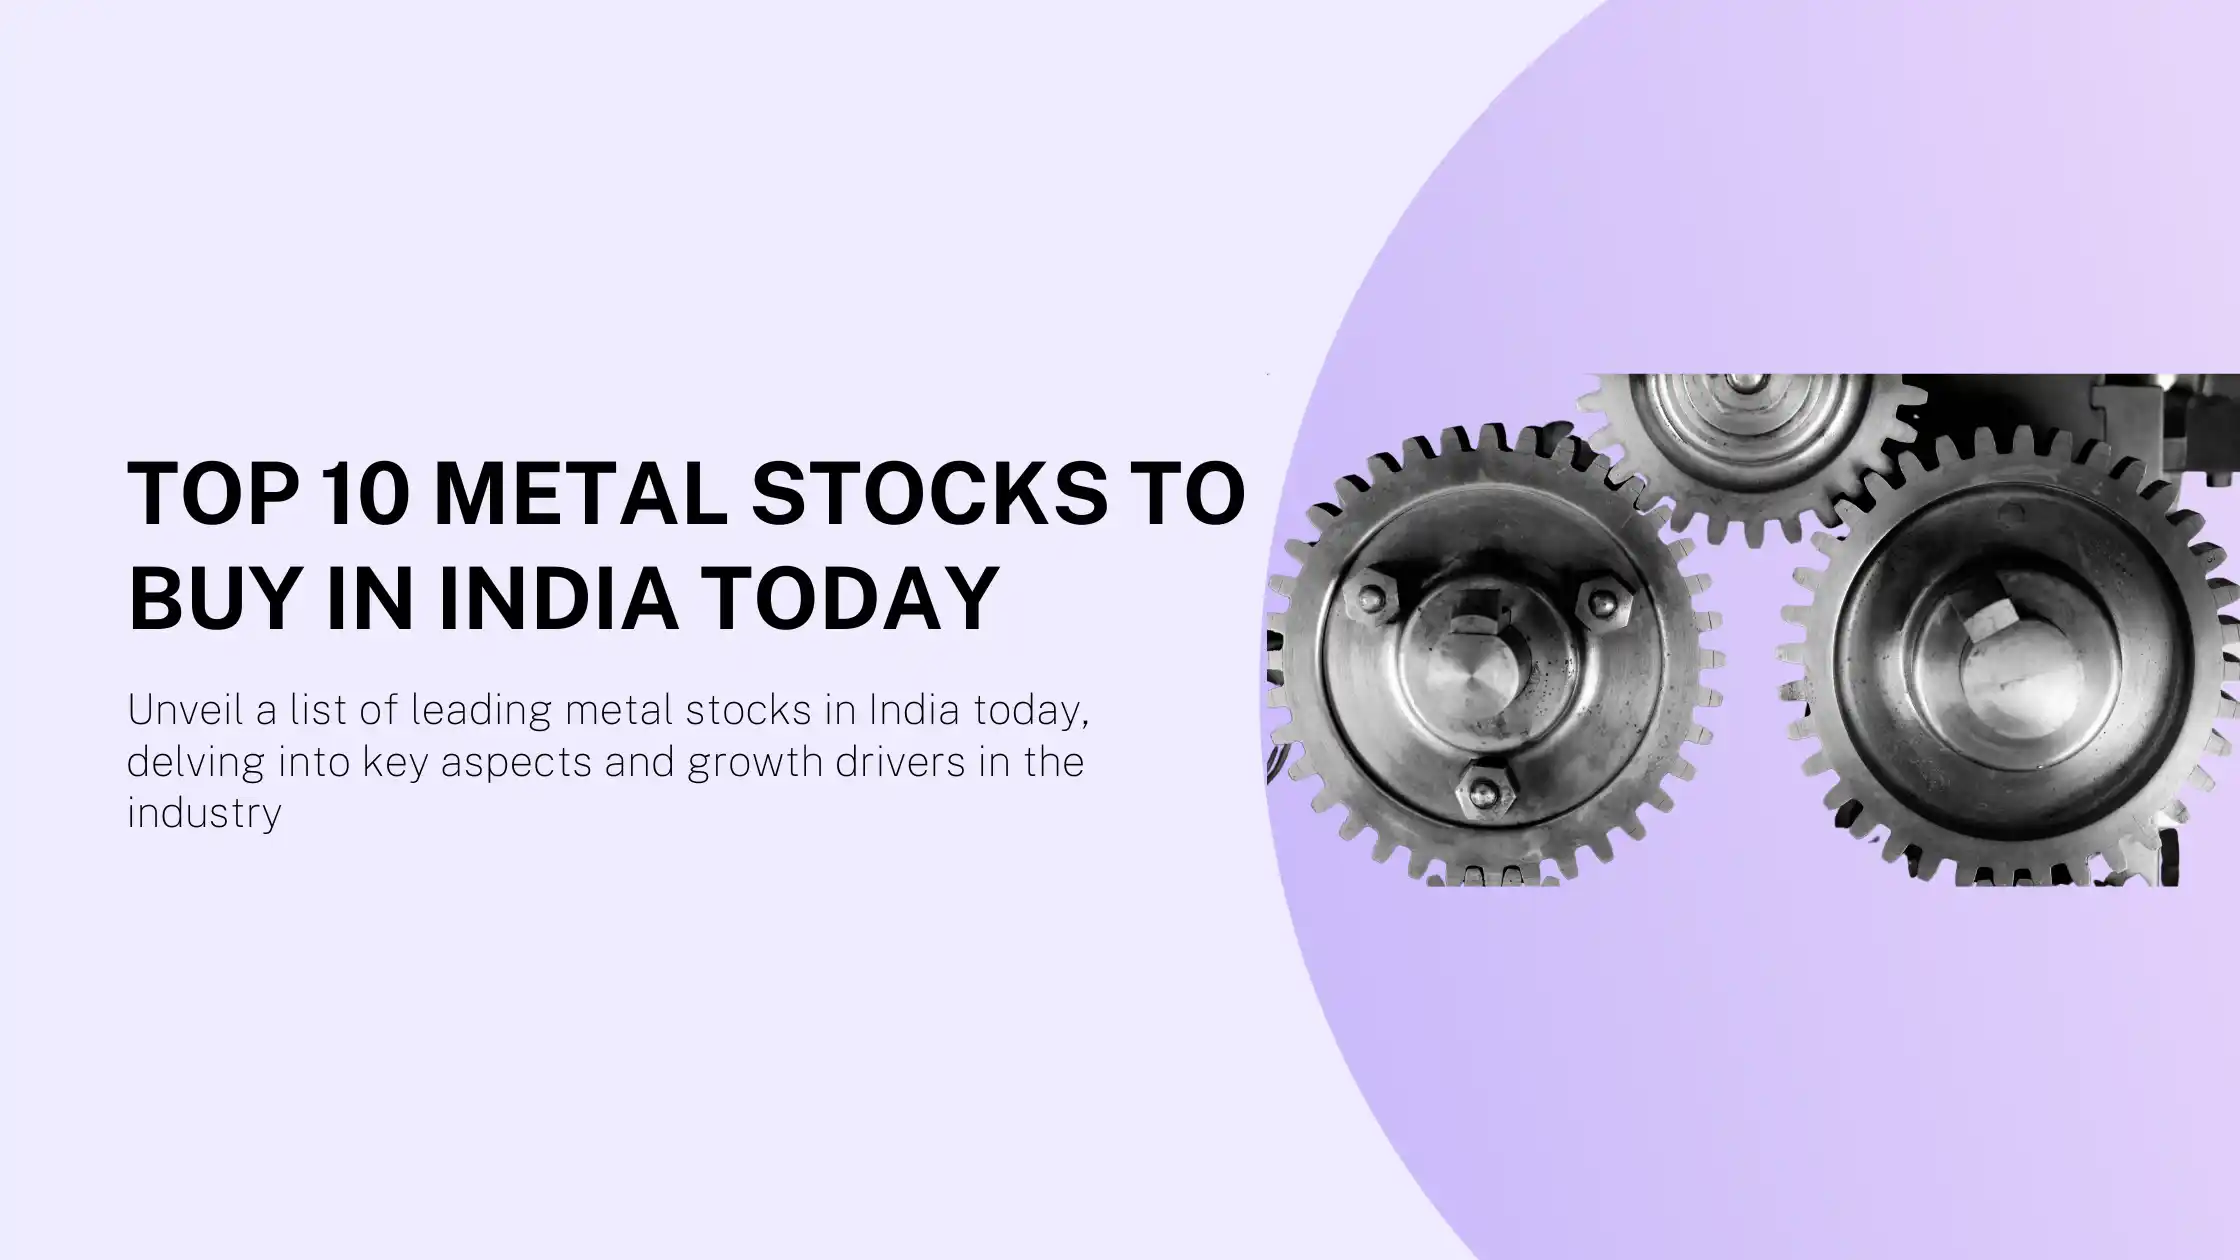 Top 10 Metal Stocks to Buy in India Today